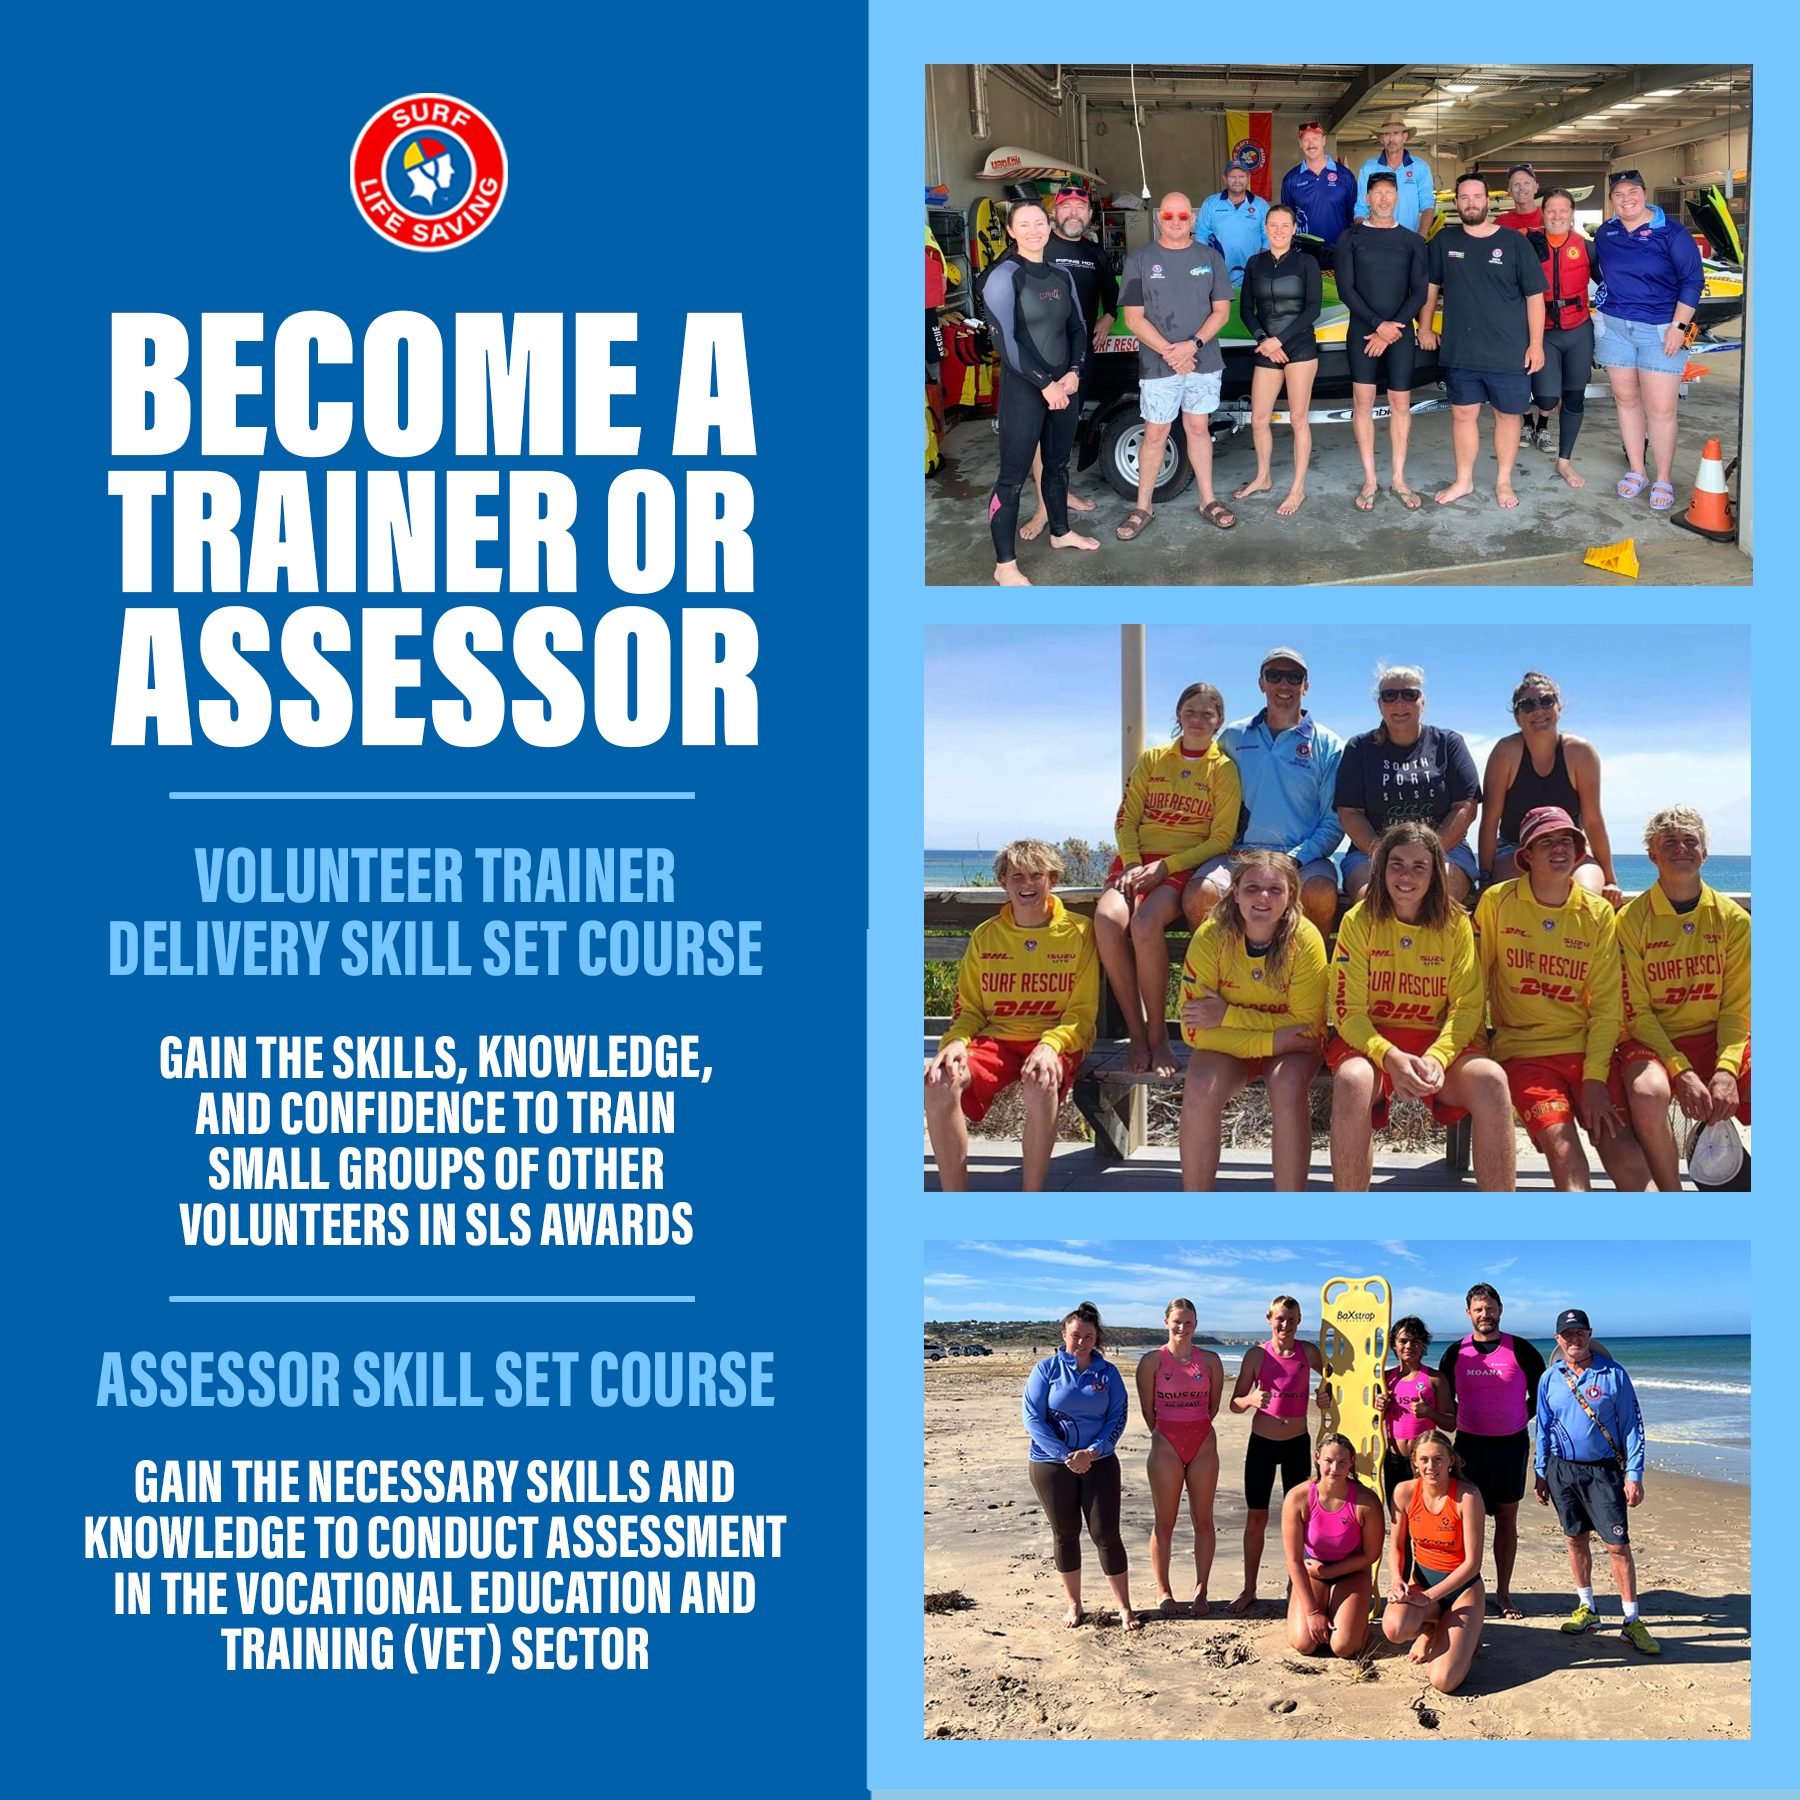 PAVE THE WAY FOR FUTURE SURF LIFESAVERS

Within SA, there are over 106 trainers, assessors and facilitators who play a vital role in the growth of our movement by supporting our members to gain their qualifications and develop the skills required to 